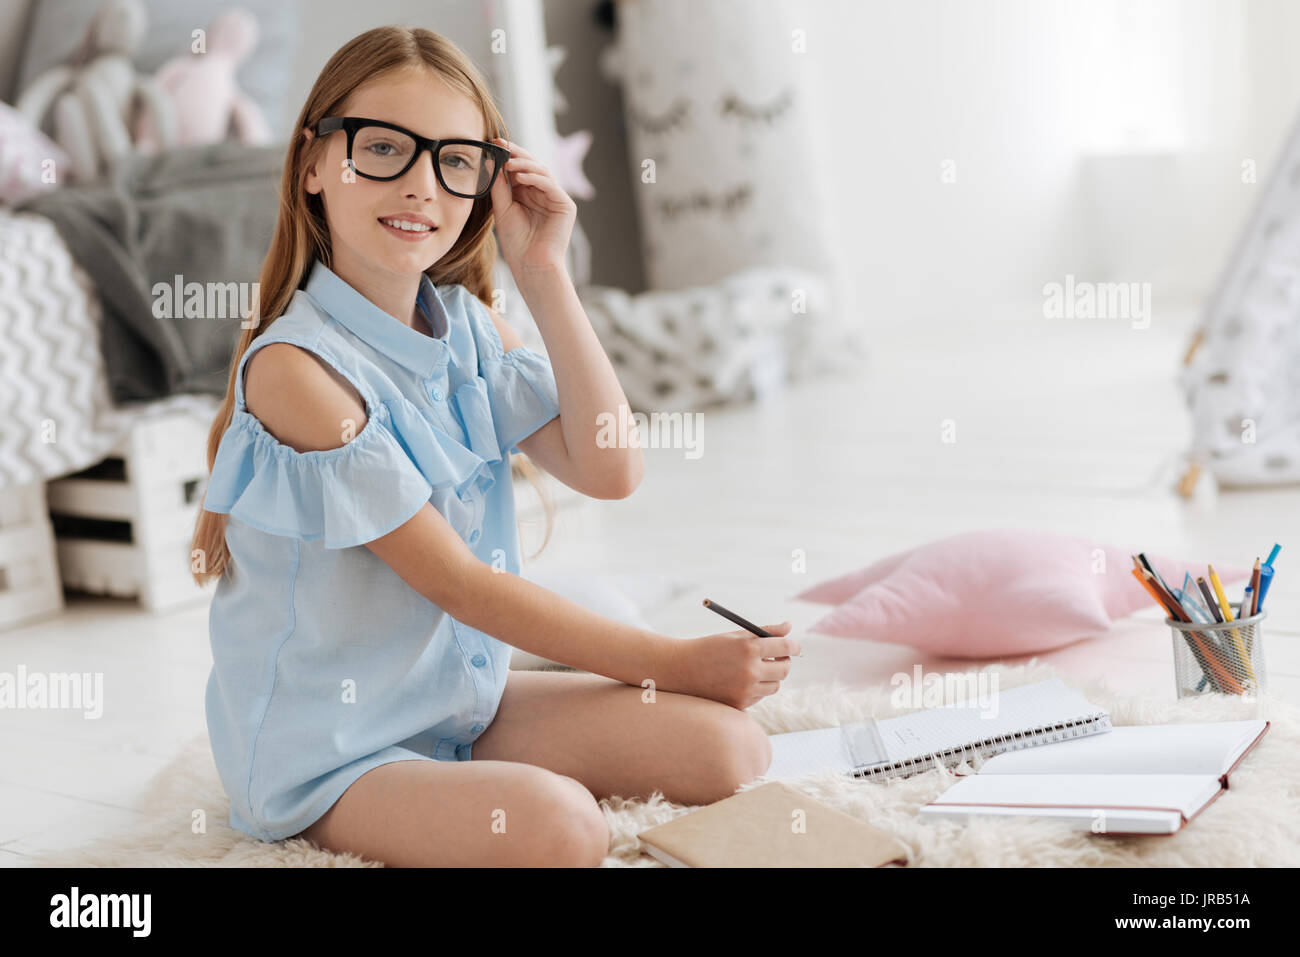 Smart young lady posing for camera while preparing school assignment Stock Photo